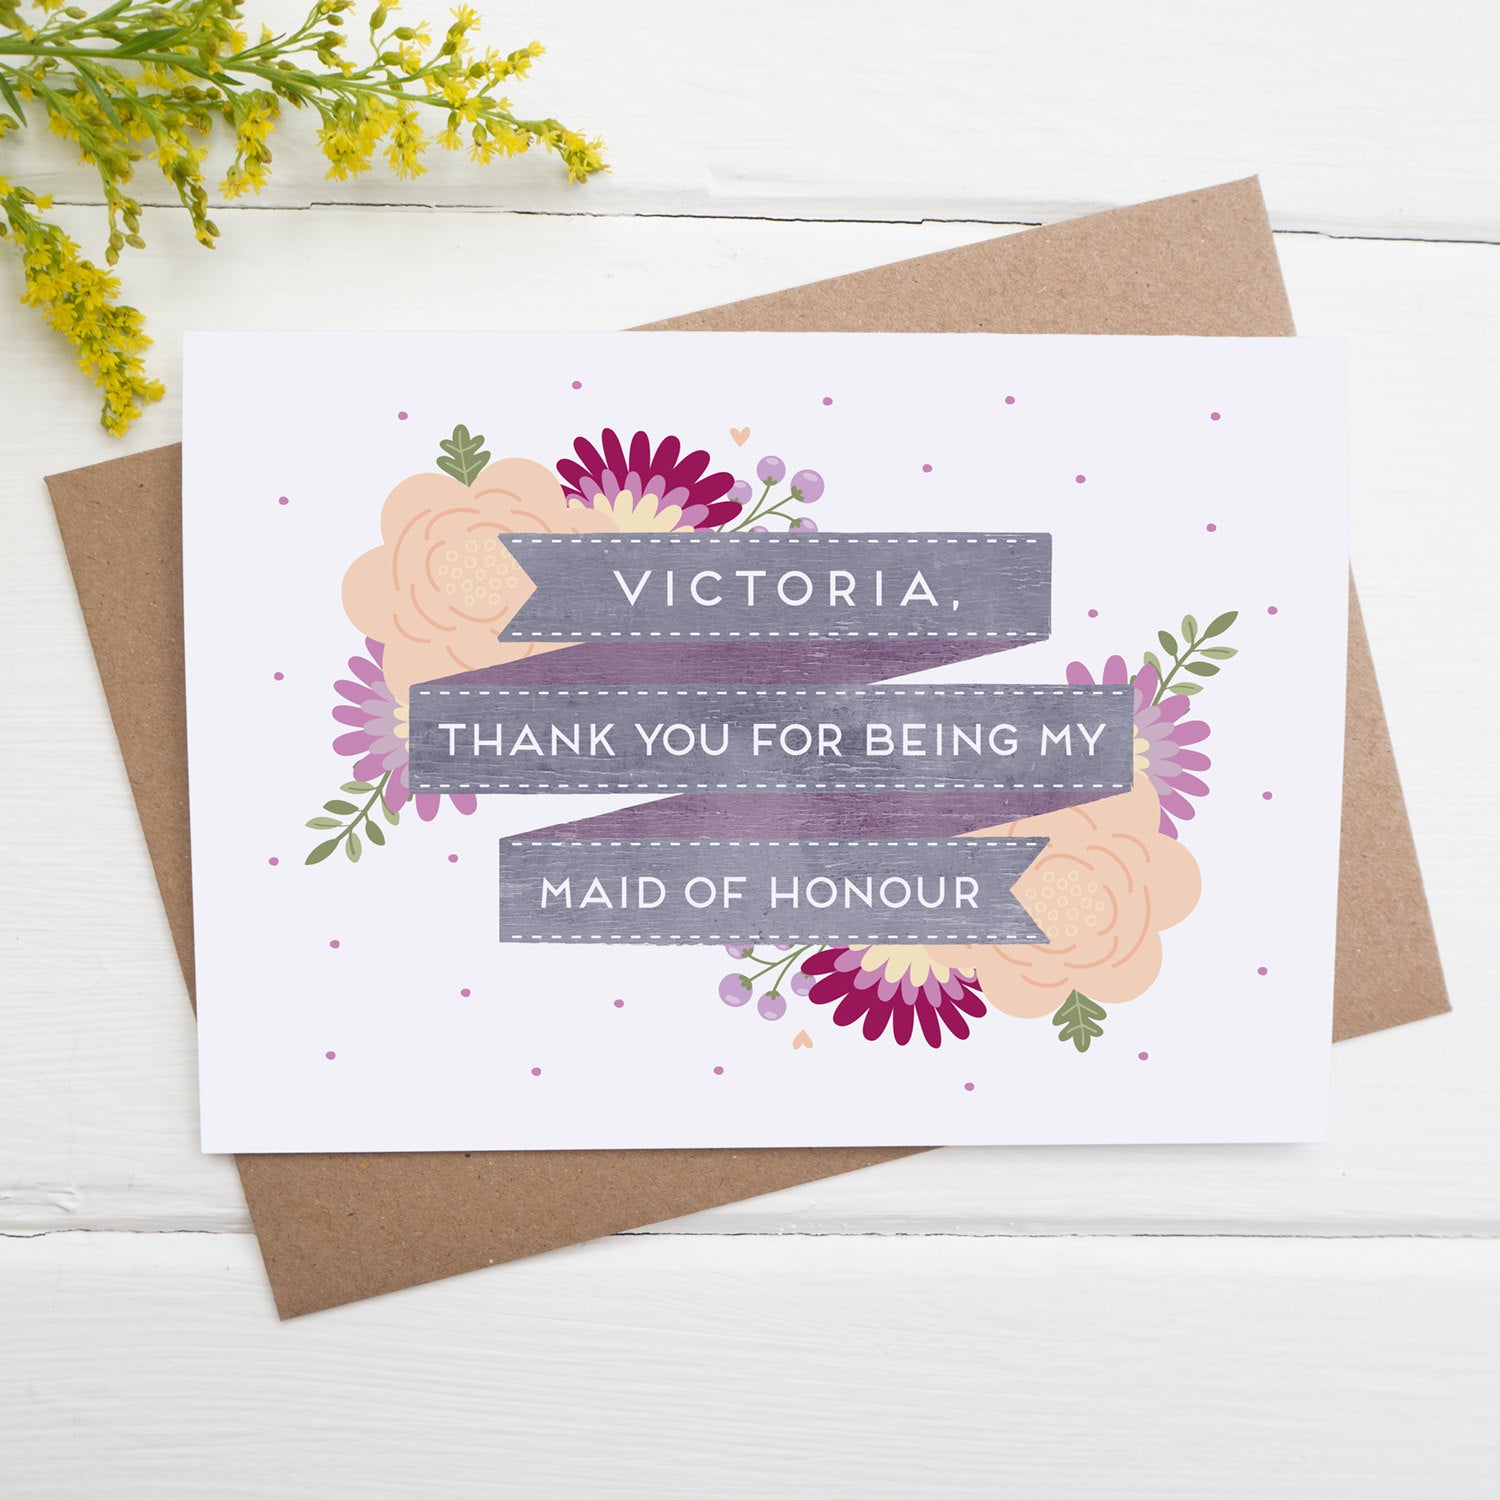 Personalised thank you for being my maid of honour card in purple